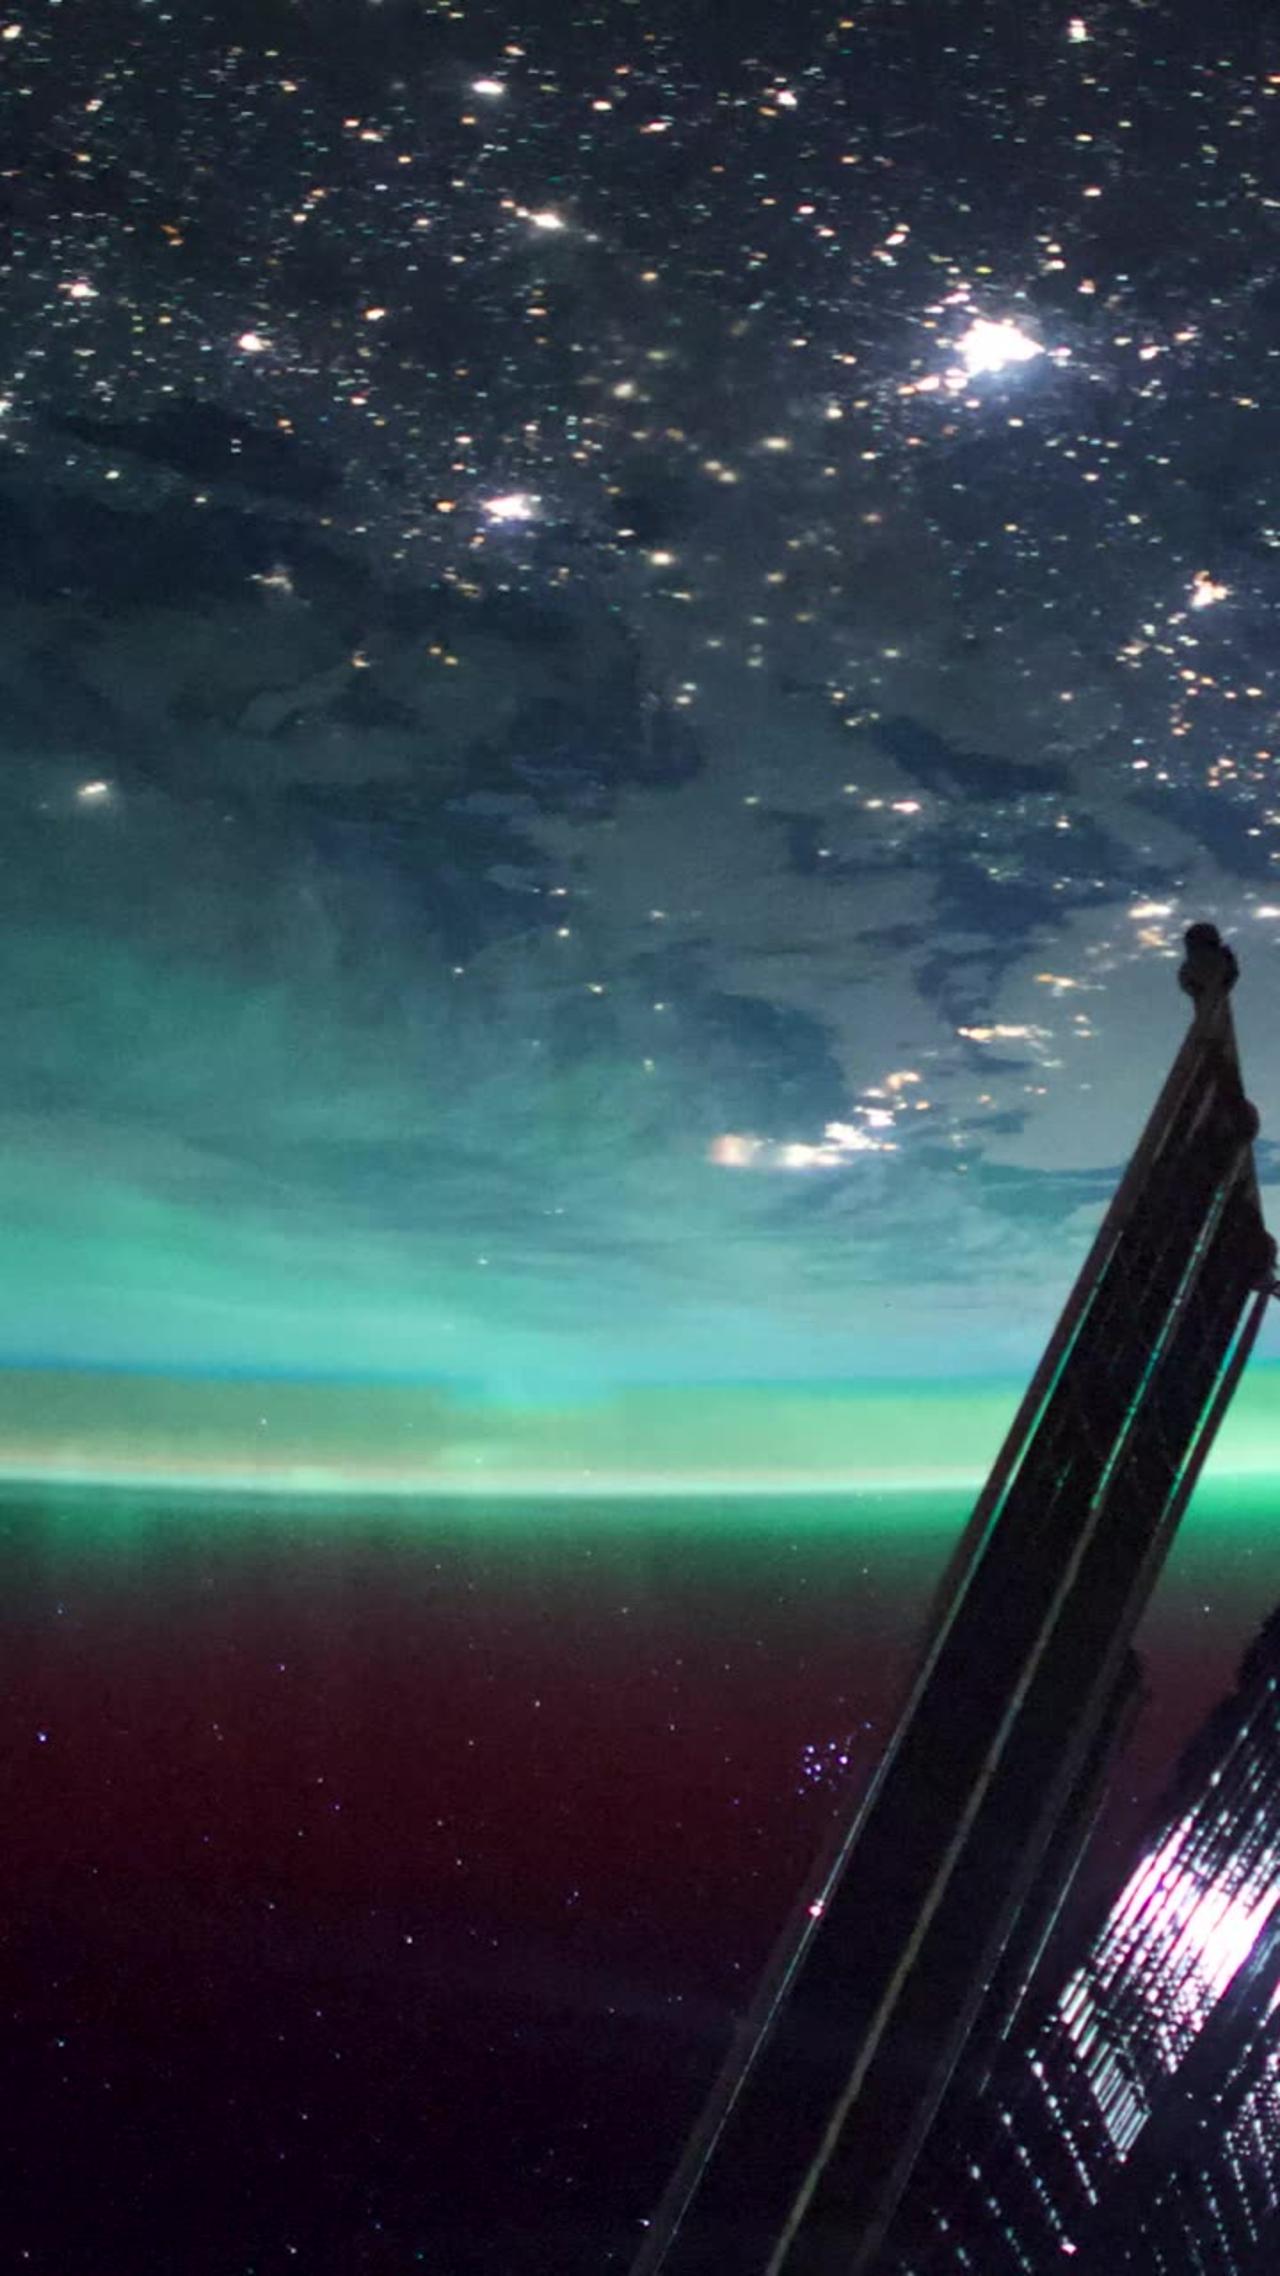 Northern light seen from the International Space Station